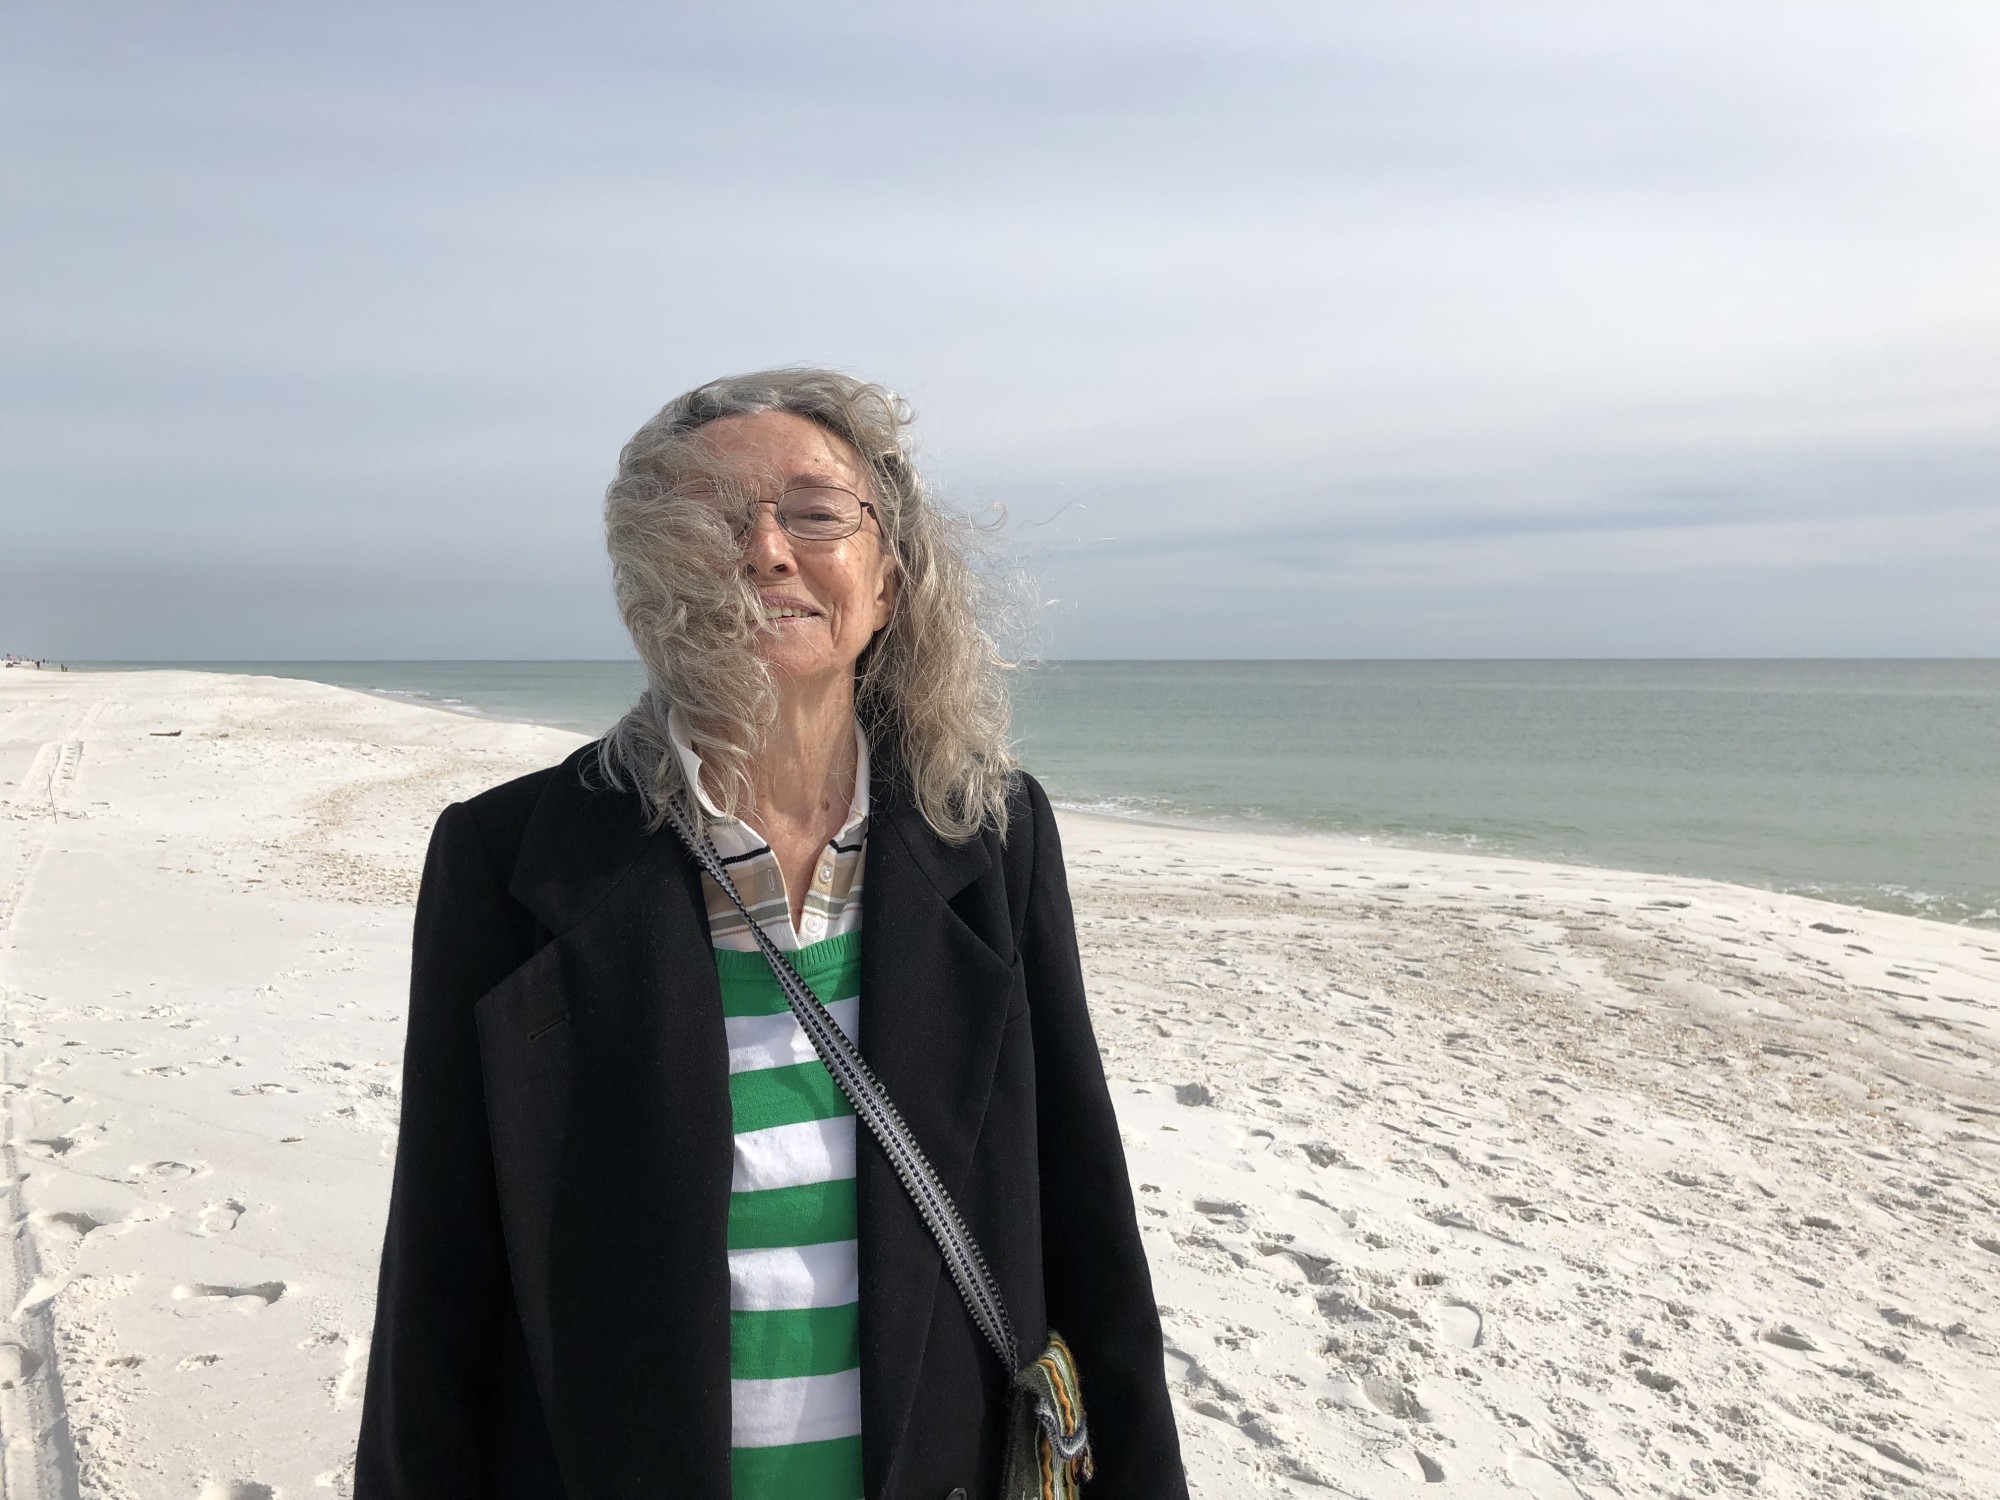 Poet is standing on a wide, white sand beach with blue/green ocean close-beside to her left and as horizon behind her.  Sea breeze blowing poet's hair forward and partially covering her face.  Poet is wearing a black winter coat over a light sweater with wide horizontal green stripes. A small, colorful cloth and woven Peruvian bag is slung over her right shoulder and across her torso.  Poet is slightly squinting from hair and sun and smiling.  A sky layered of blues and paler washes of blues and way-subtle pinks spread and fill the space above the water.